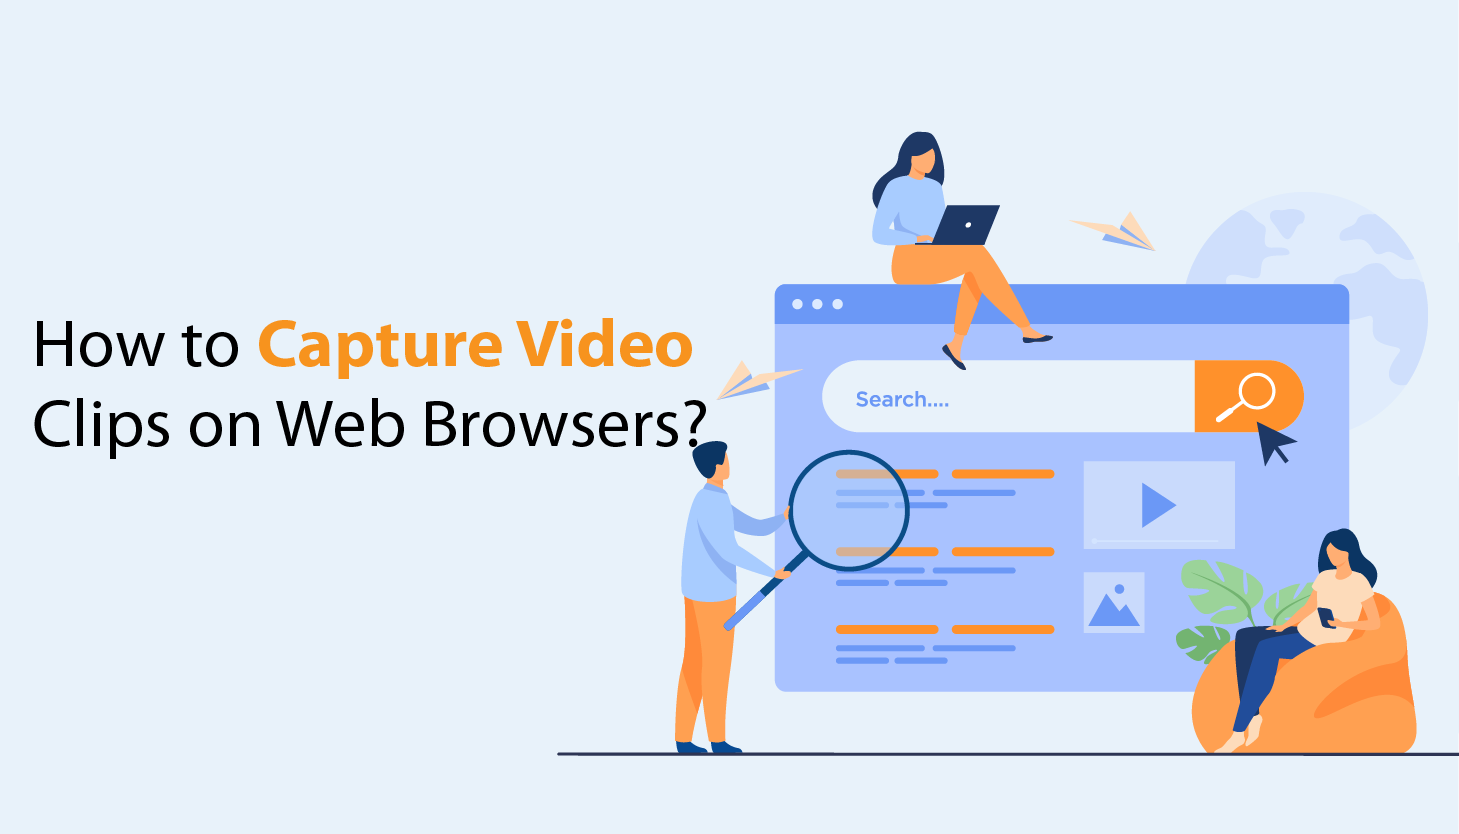  How to Capture Video Clips on Web Browsers